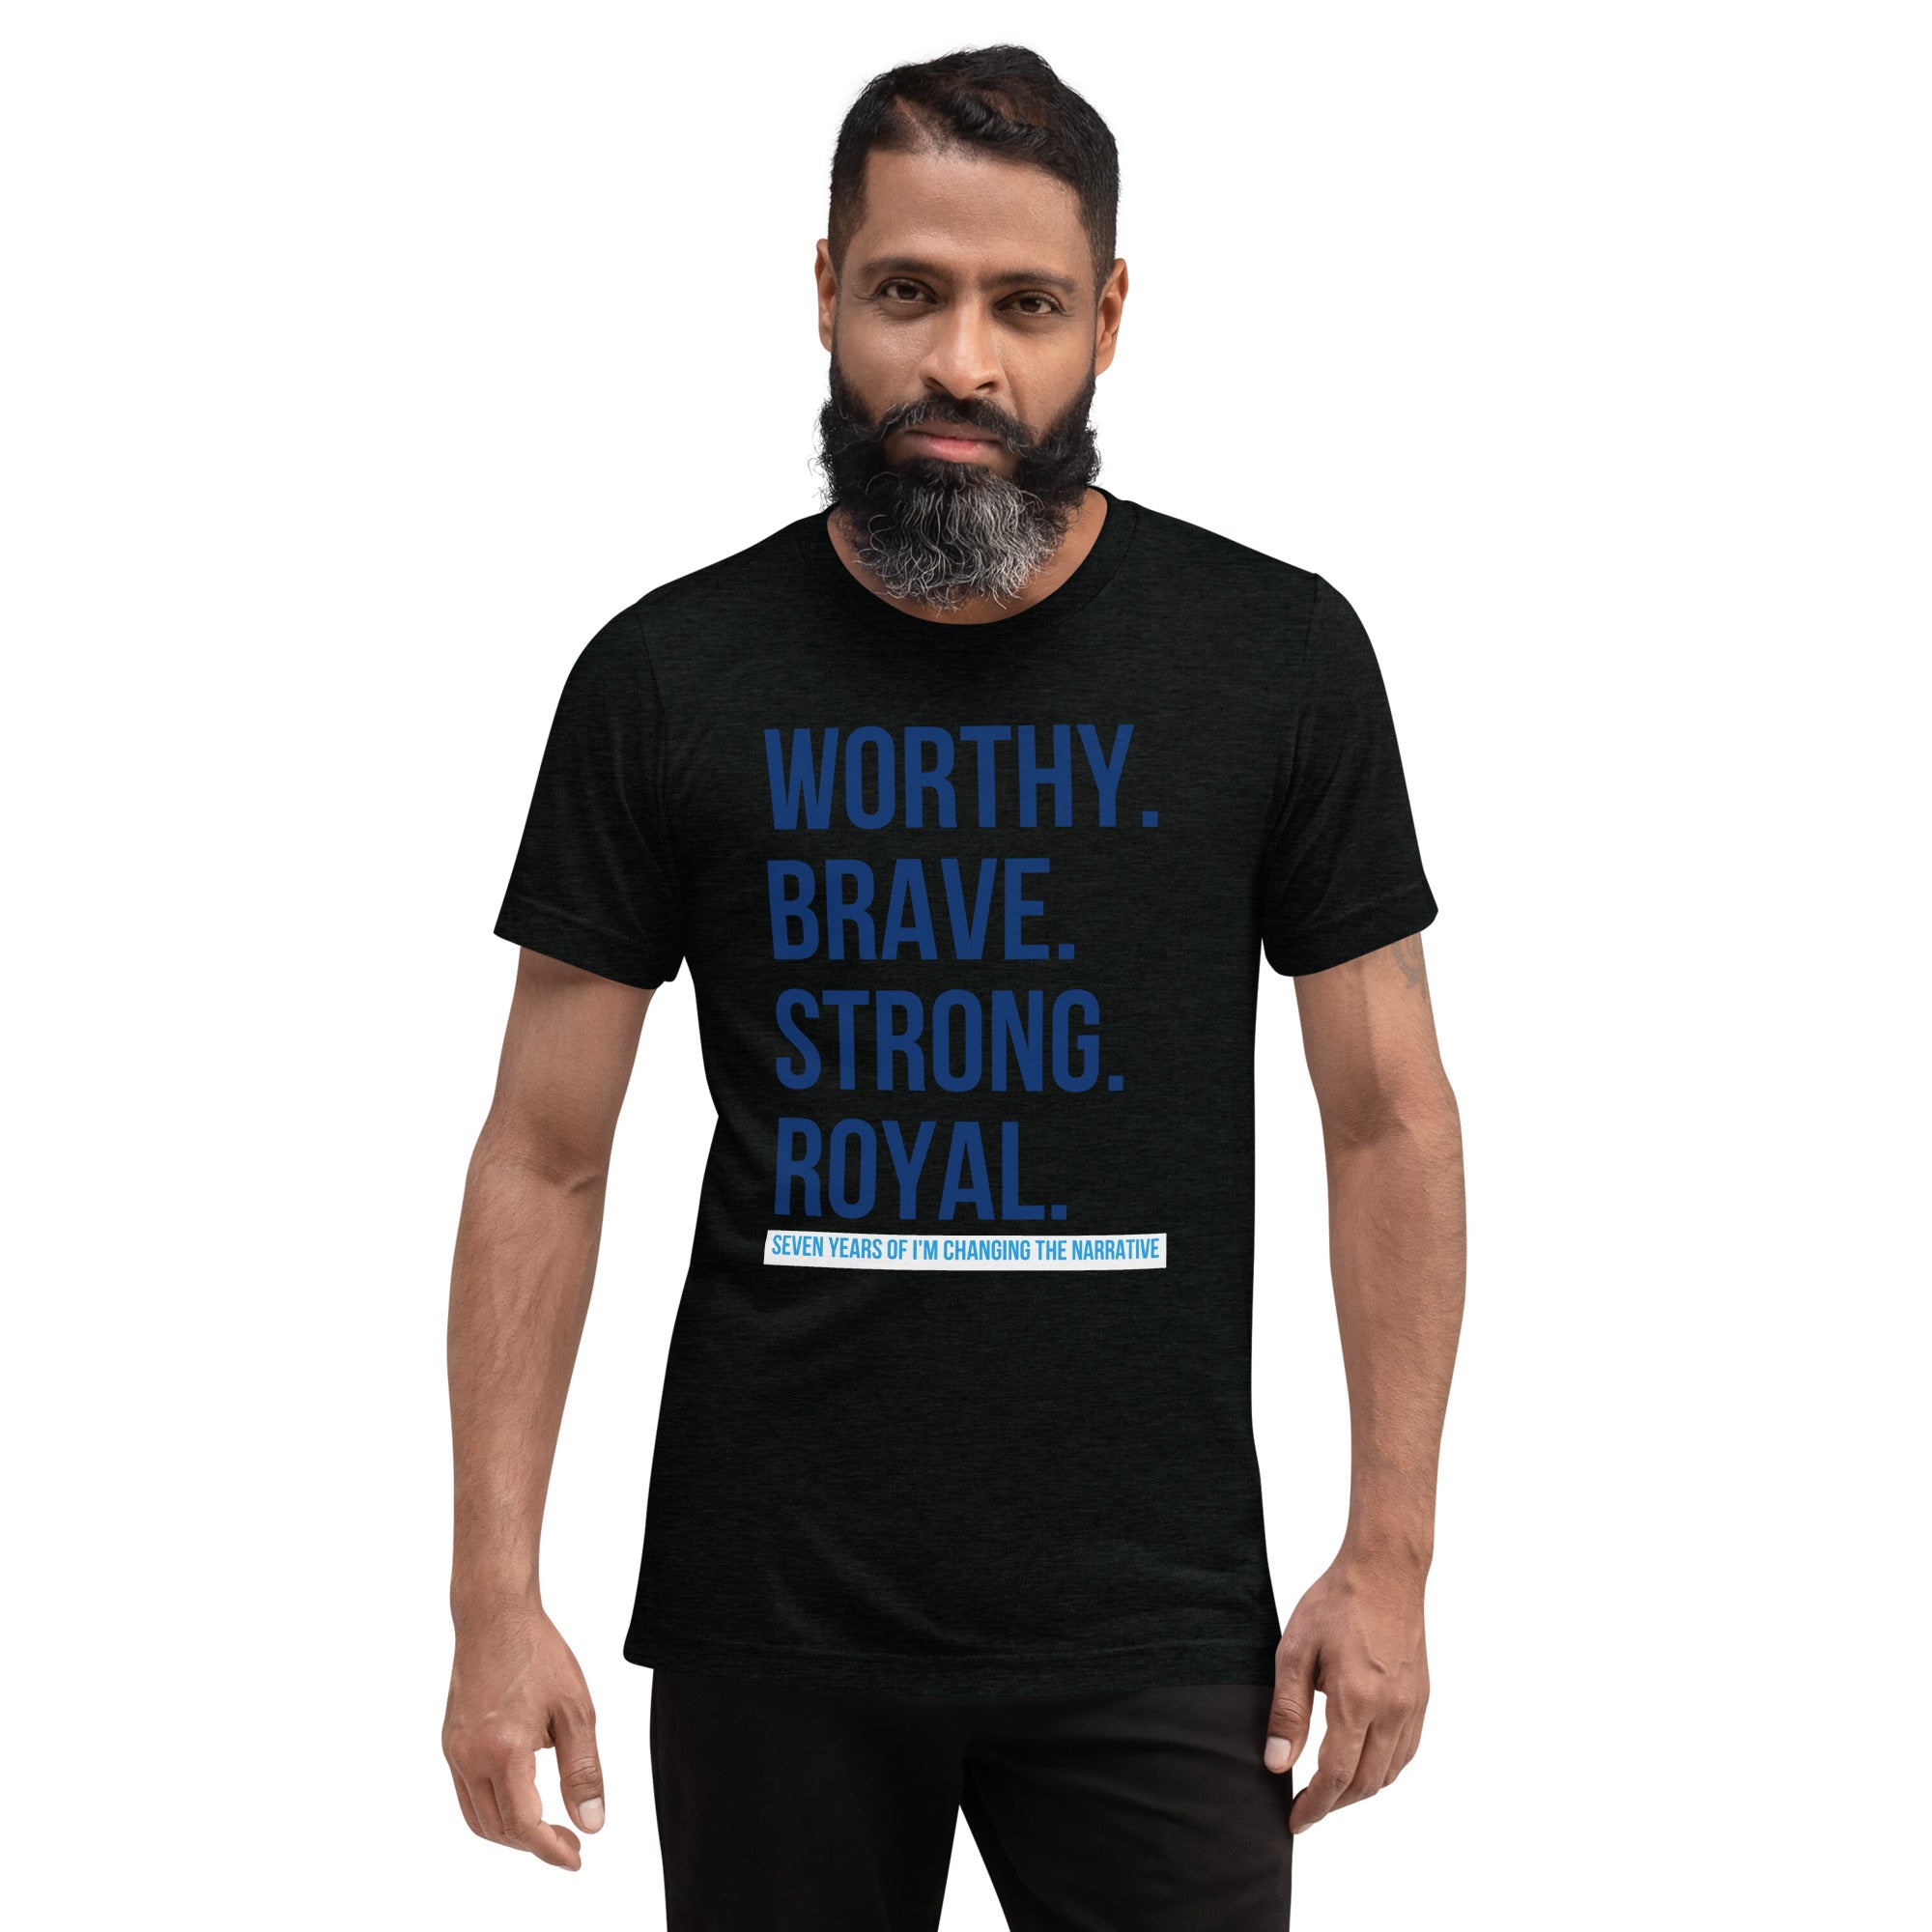 Worthy, Brave, Strong - short sleeve t-shirt